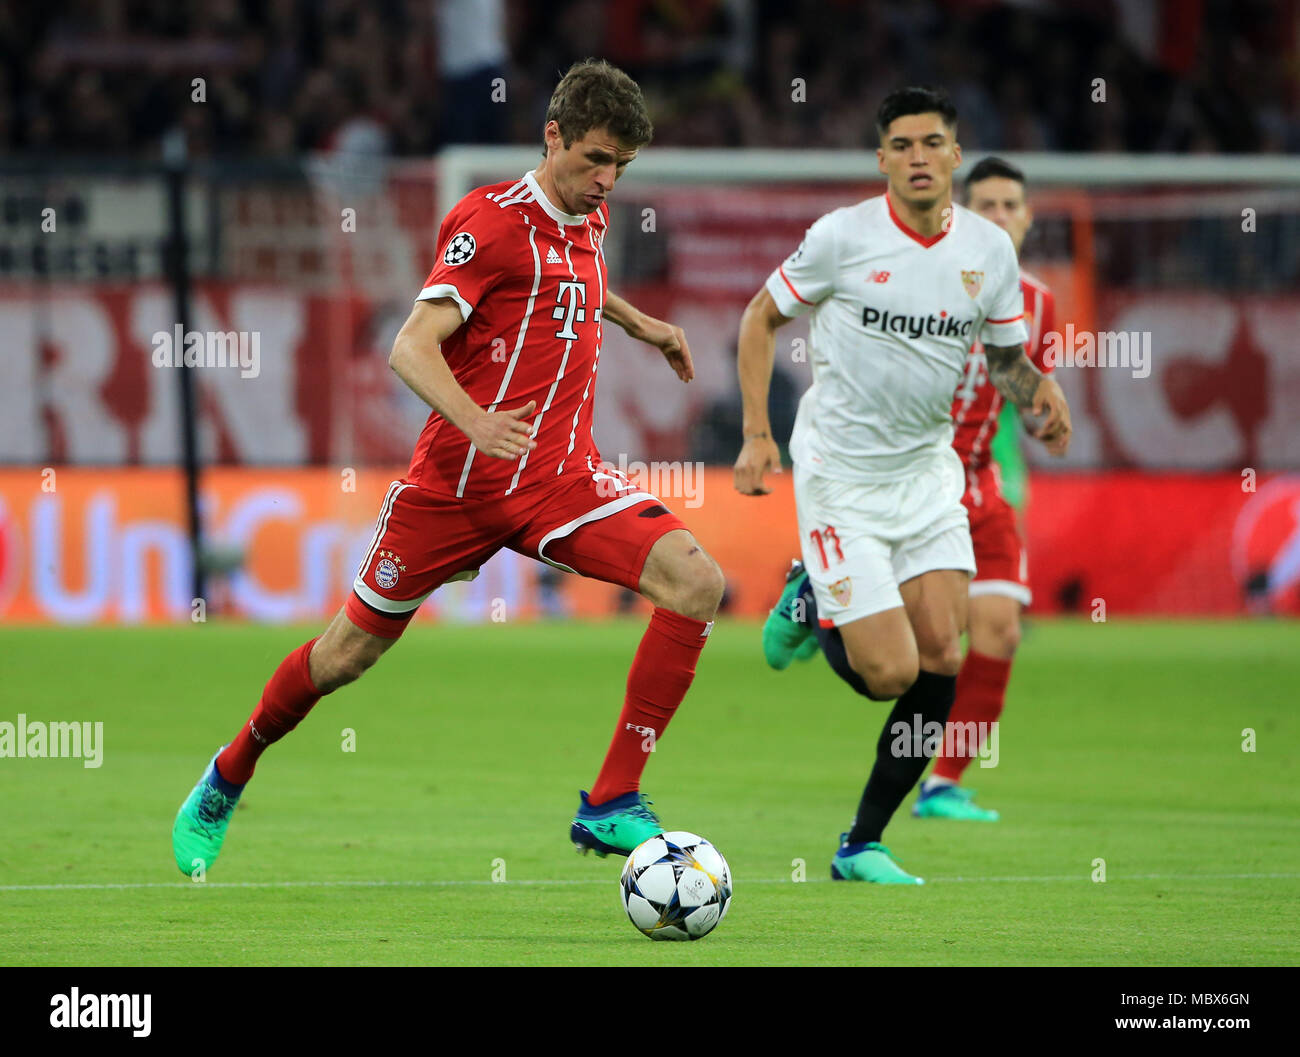 Munich, Germany. 11th Apr, 2018. Bayern Munich's Thomas Mueller (L) competes during the UEFA Champions League quarterfinal second leg soccer match between Bayern Munich of Germany and FC Sevilla of Spain in Munich, Germany, on April 11, 2018. The match ended 0-0 and Bayern Munich advanced to the semifinal with 2-1 on aggregate. Credit: Philippe Ruiz/Xinhua/Alamy Live News Stock Photo